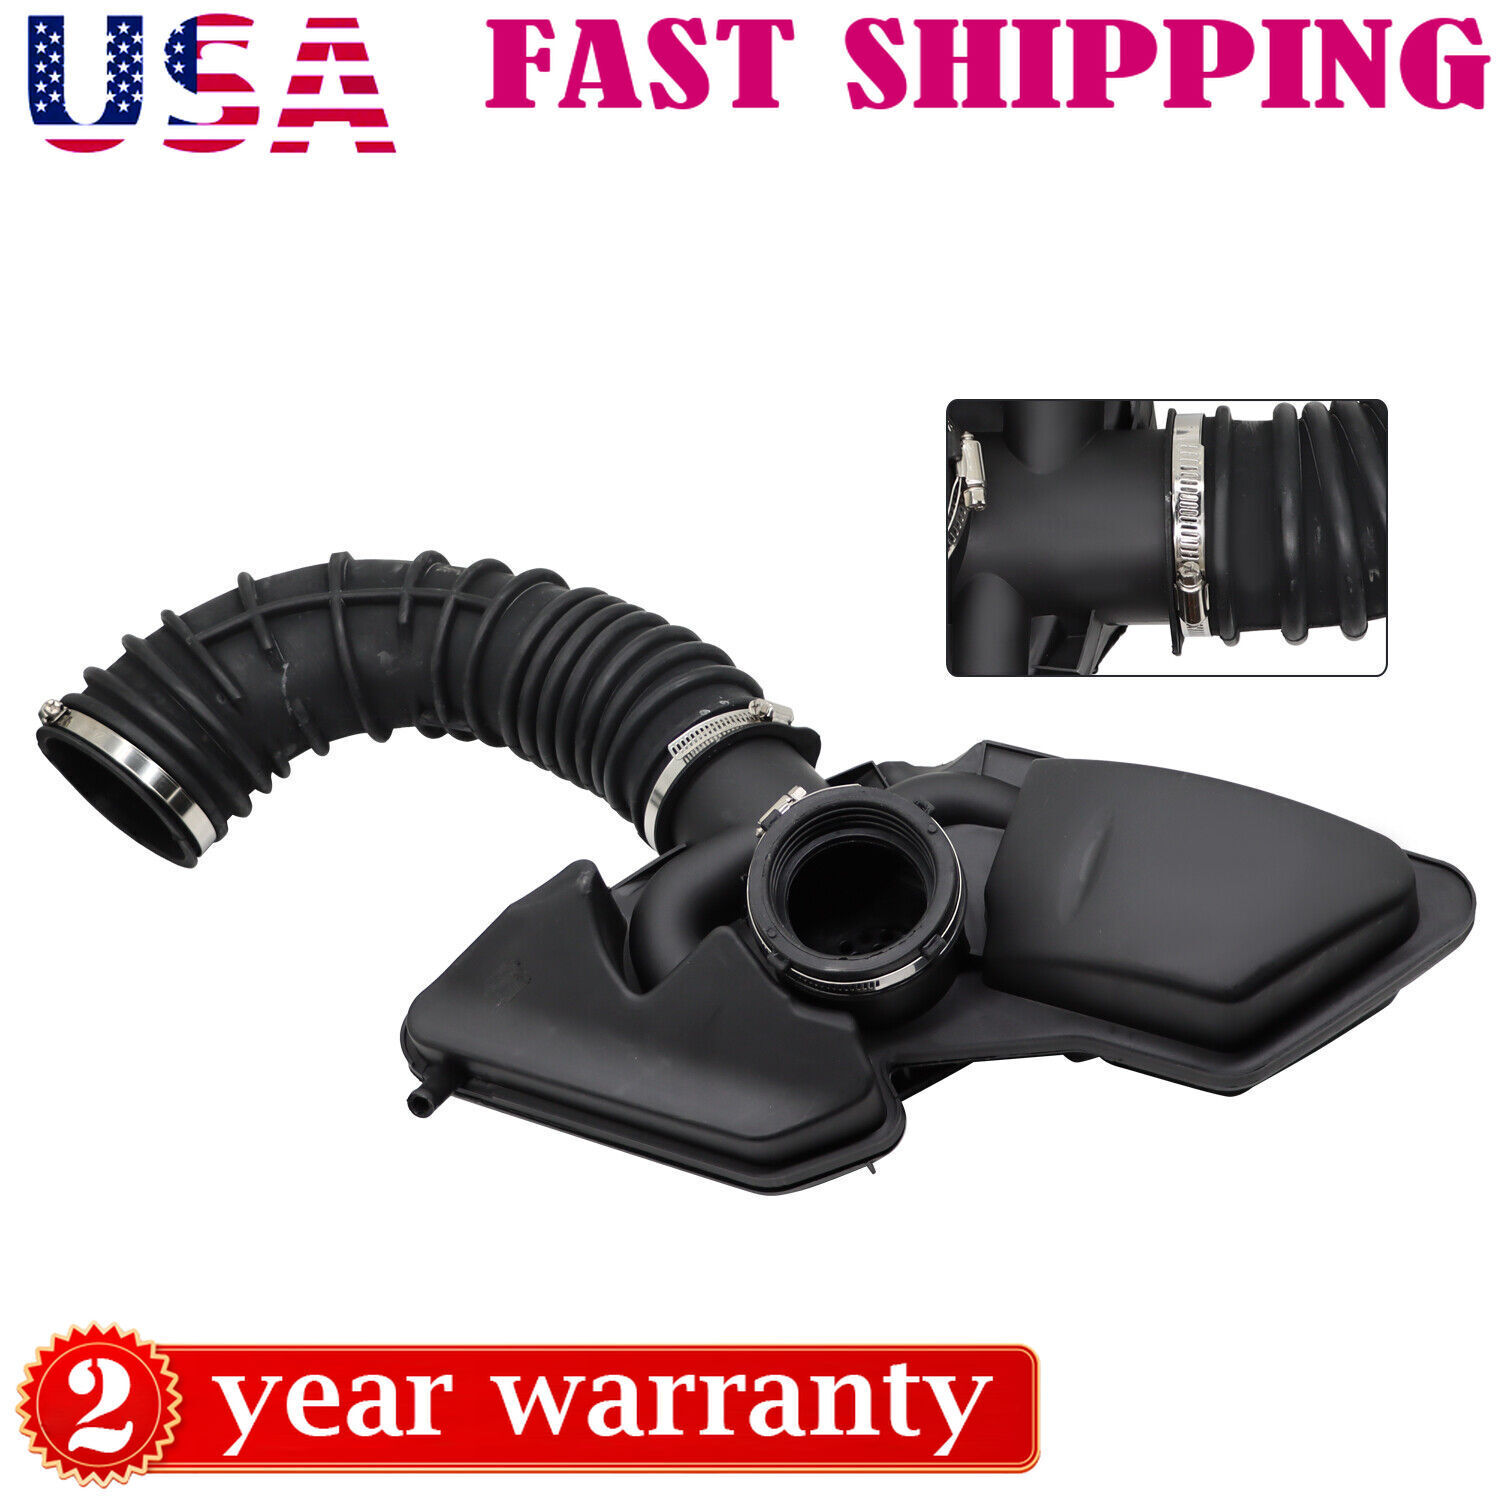 Air Intake Hose Tube & Outlet Duct For 2.4L Buick Regal Chevrolet Malibu Impala